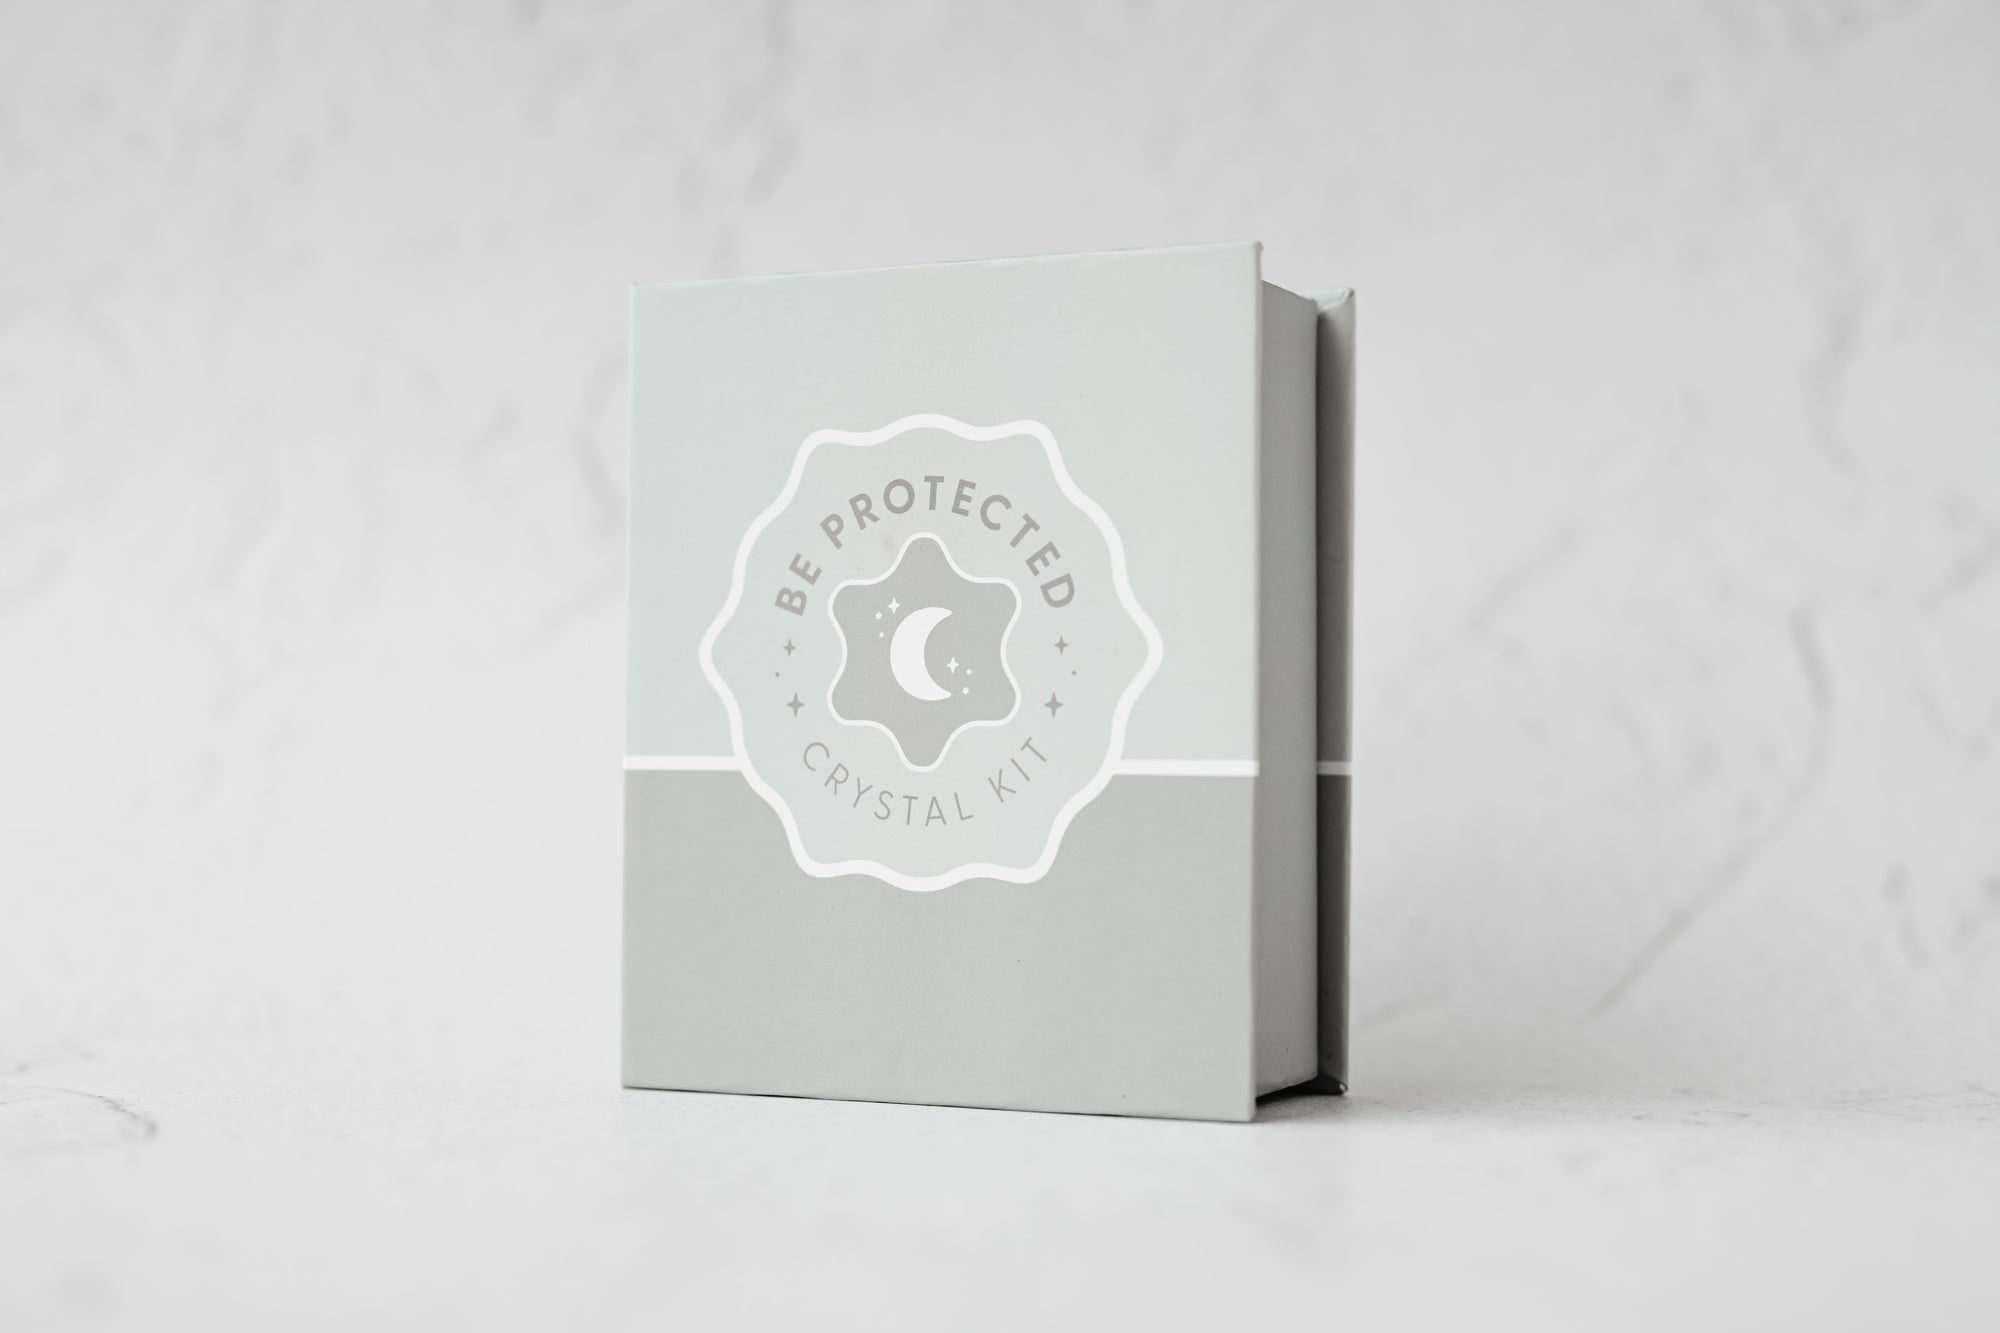 Be Protected Crystal Kit